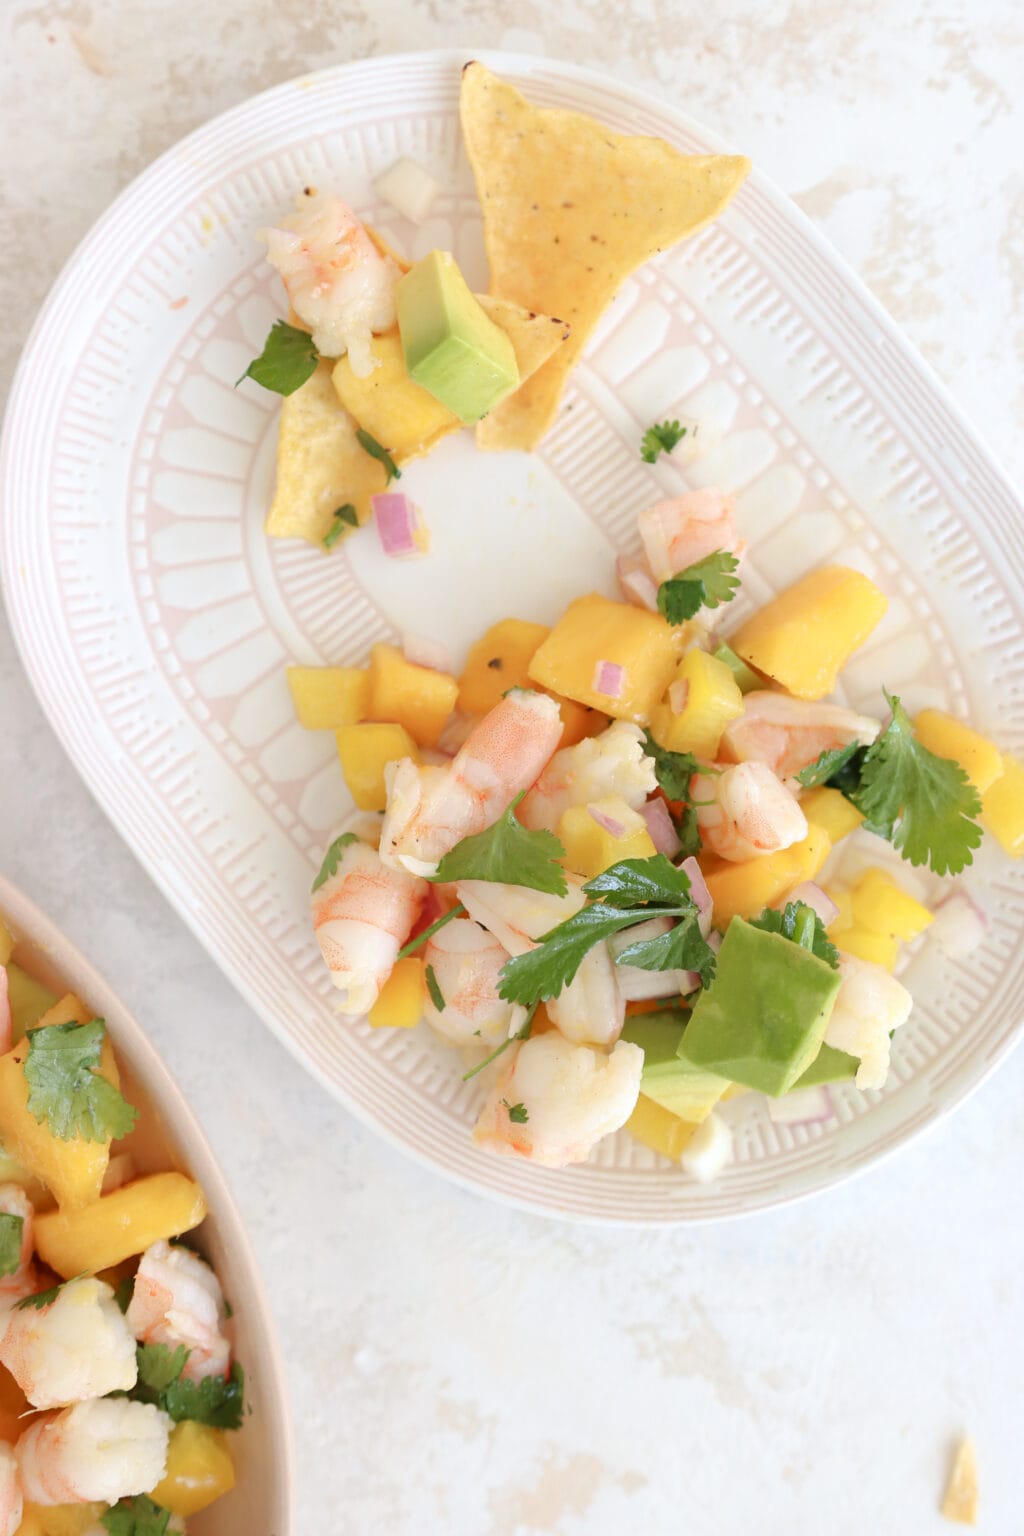 A white plate with pink details has a serving of salad and chips. In the corner is a platter of salad. There is red onion, chopped shrimp, cubed mango, and tortilla chips on the plate